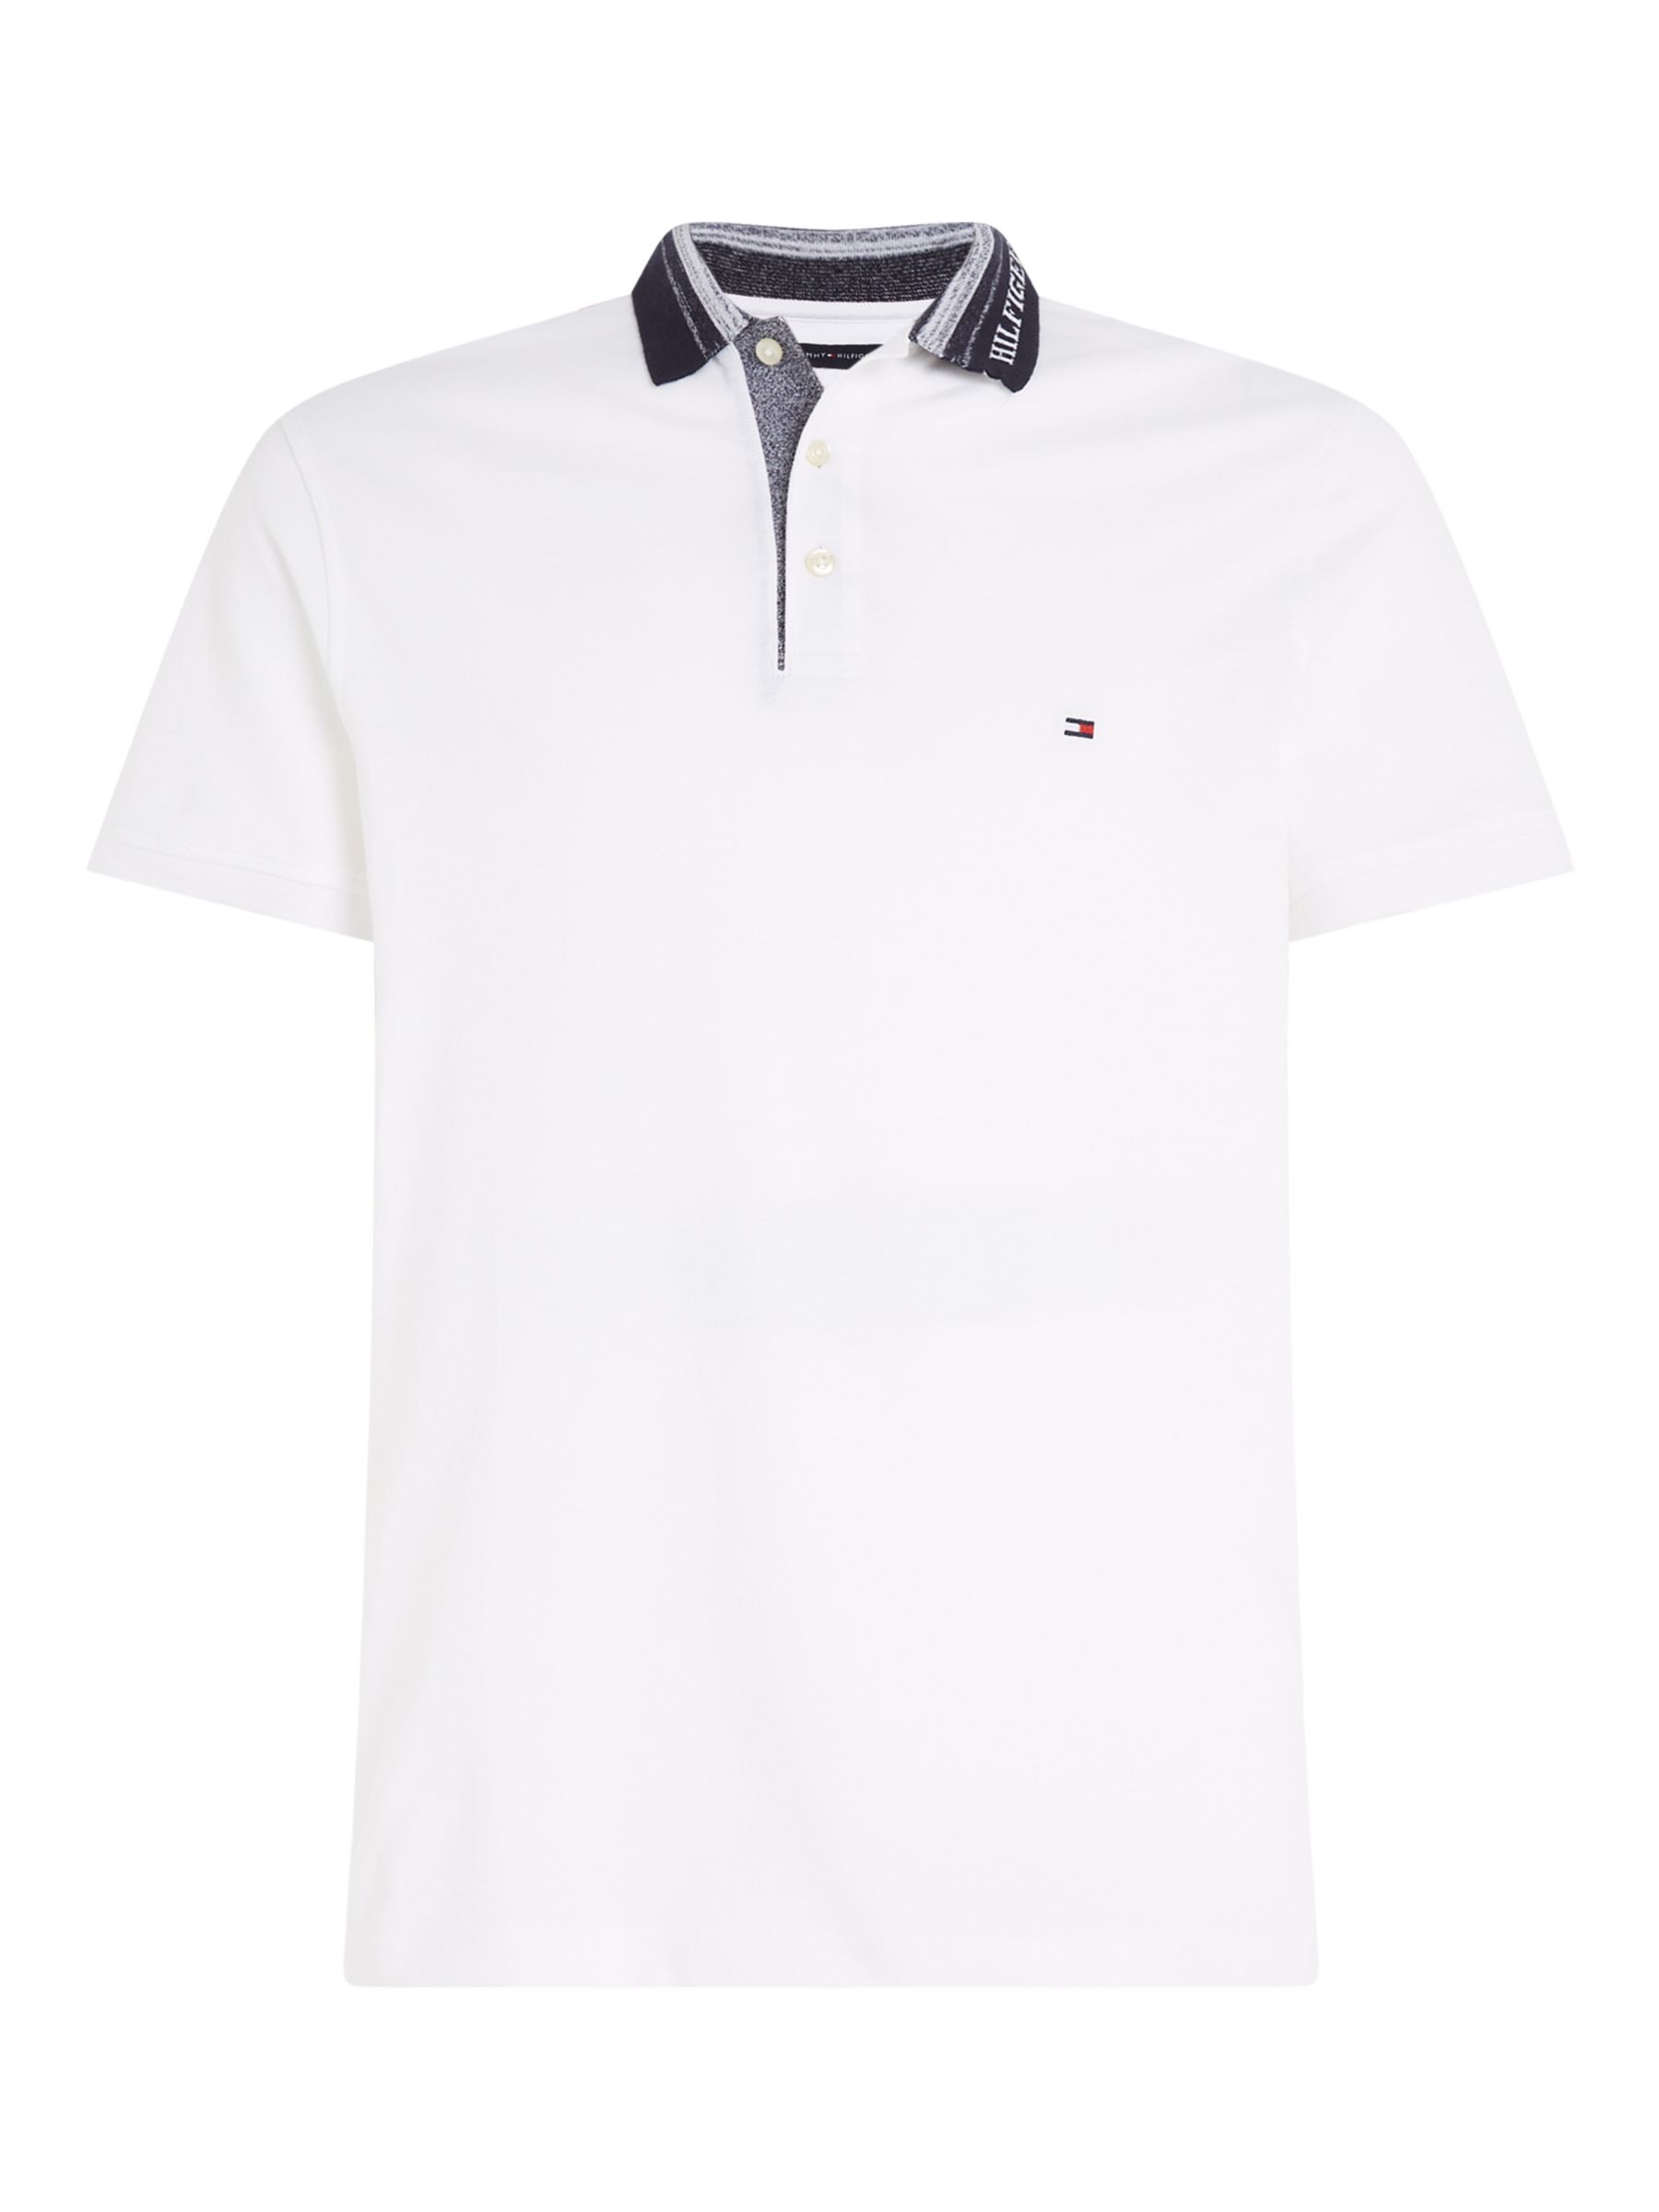 Tommy Hilfiger Contrast Collar Polo Shirt, White, XS